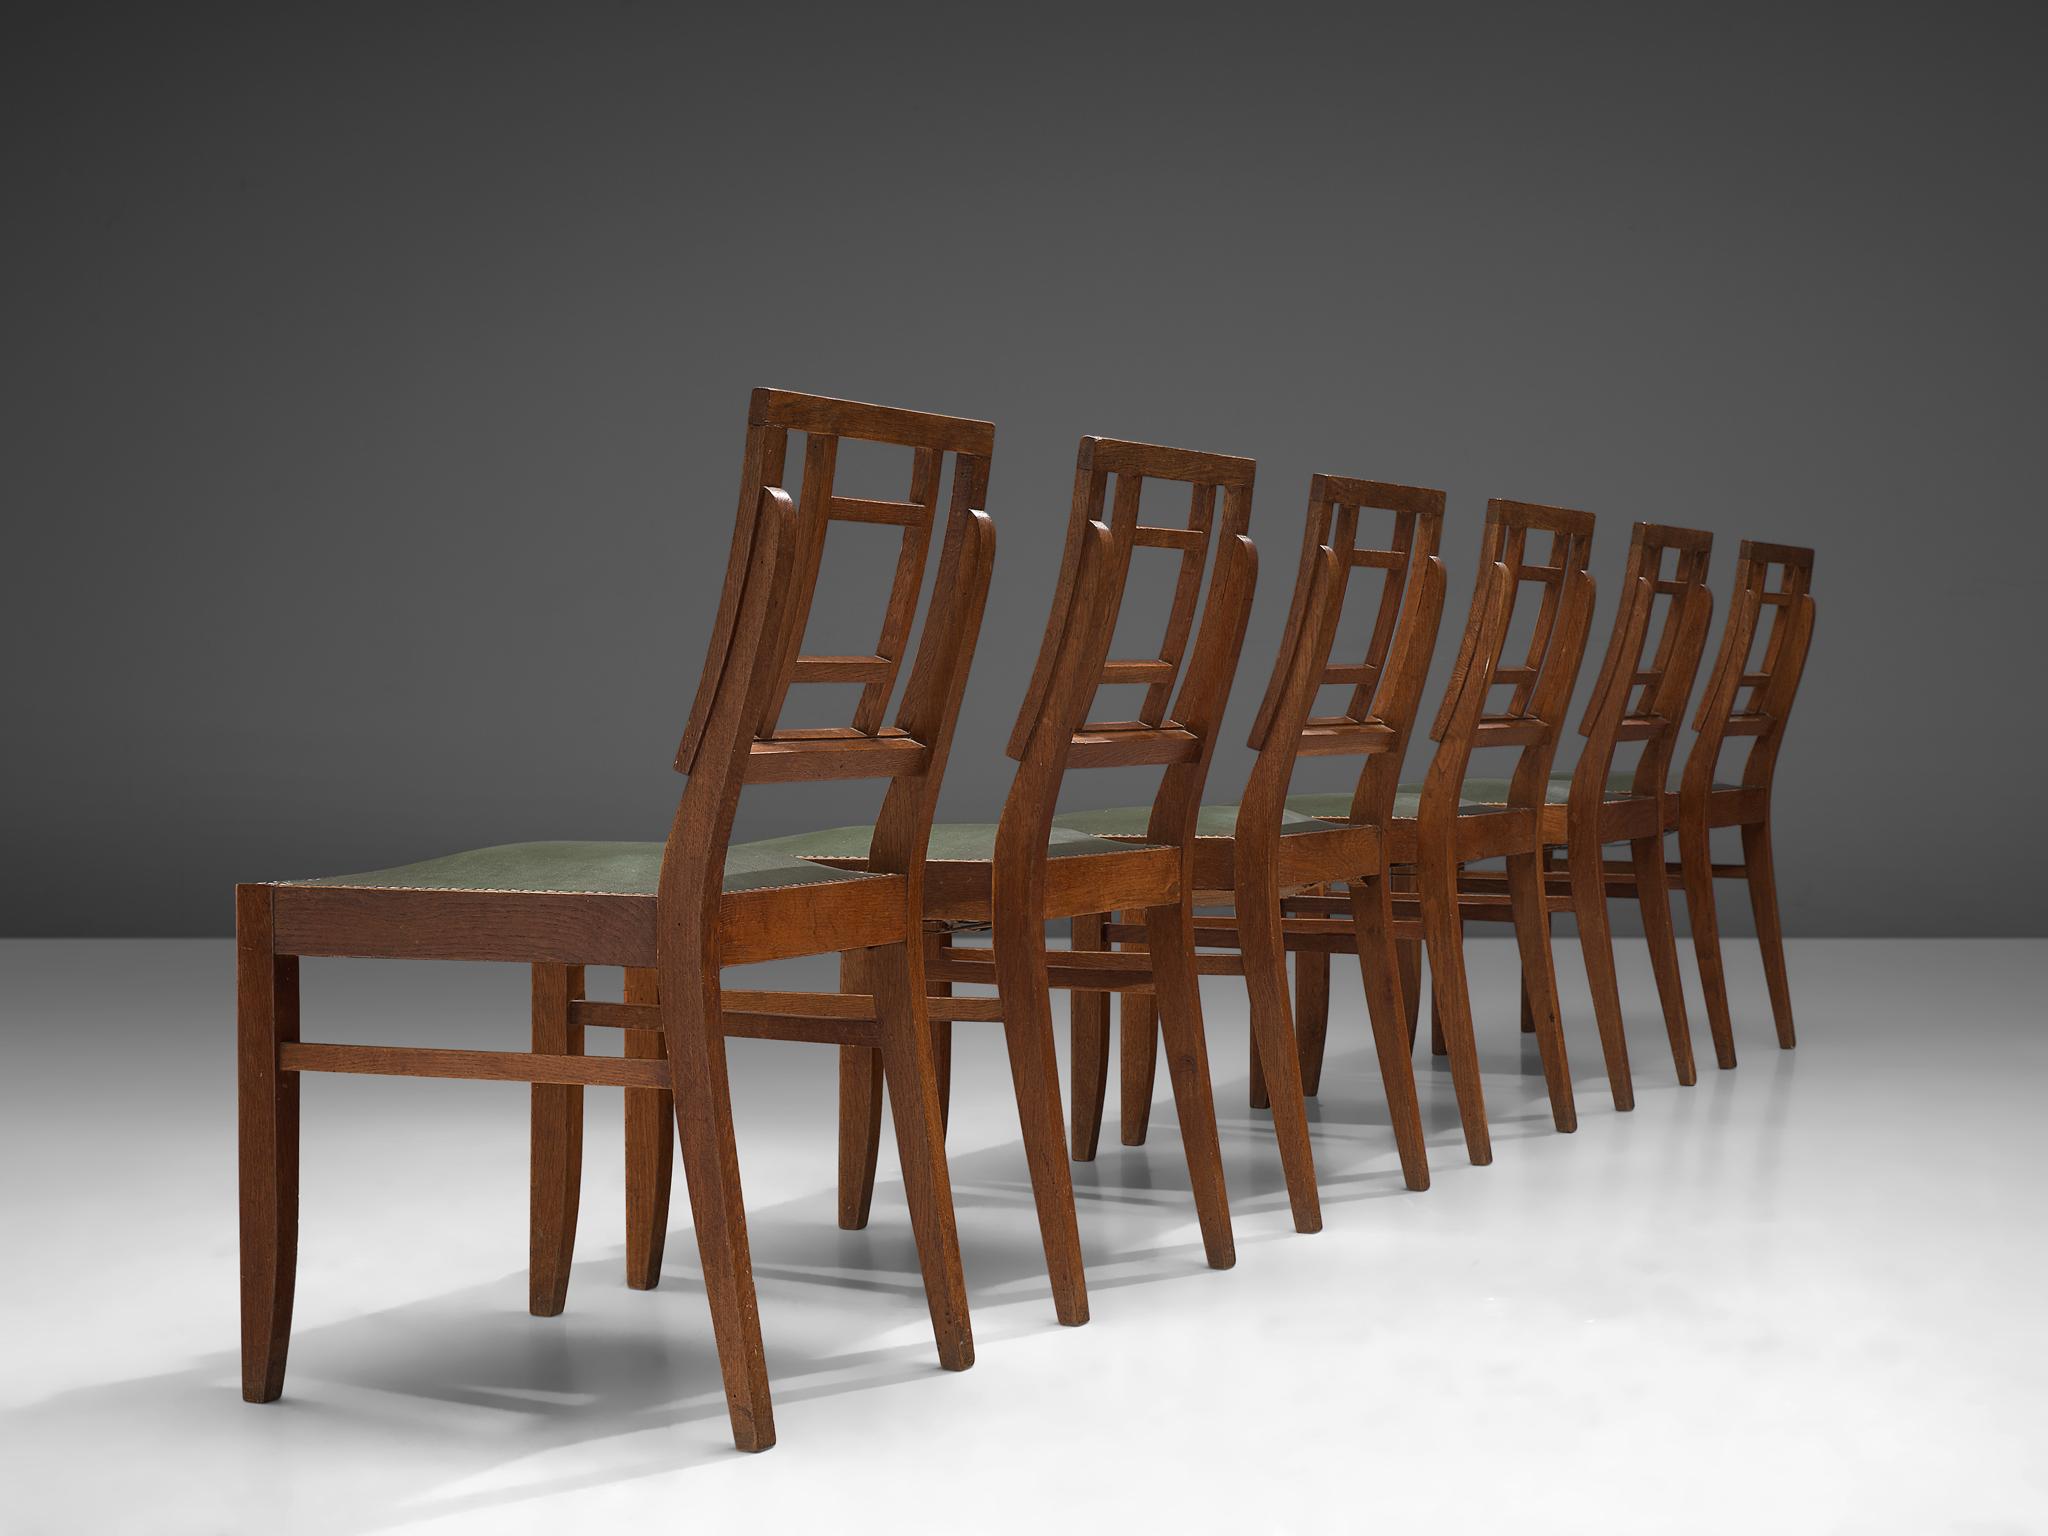 Set of six Art Deco dining chairs in solid oak, France, 1940s

This set of French dining chairs show a basic design, with strong proportions. The geometric backrest is a typical feature from the Art Deco, which also gives the chair an open